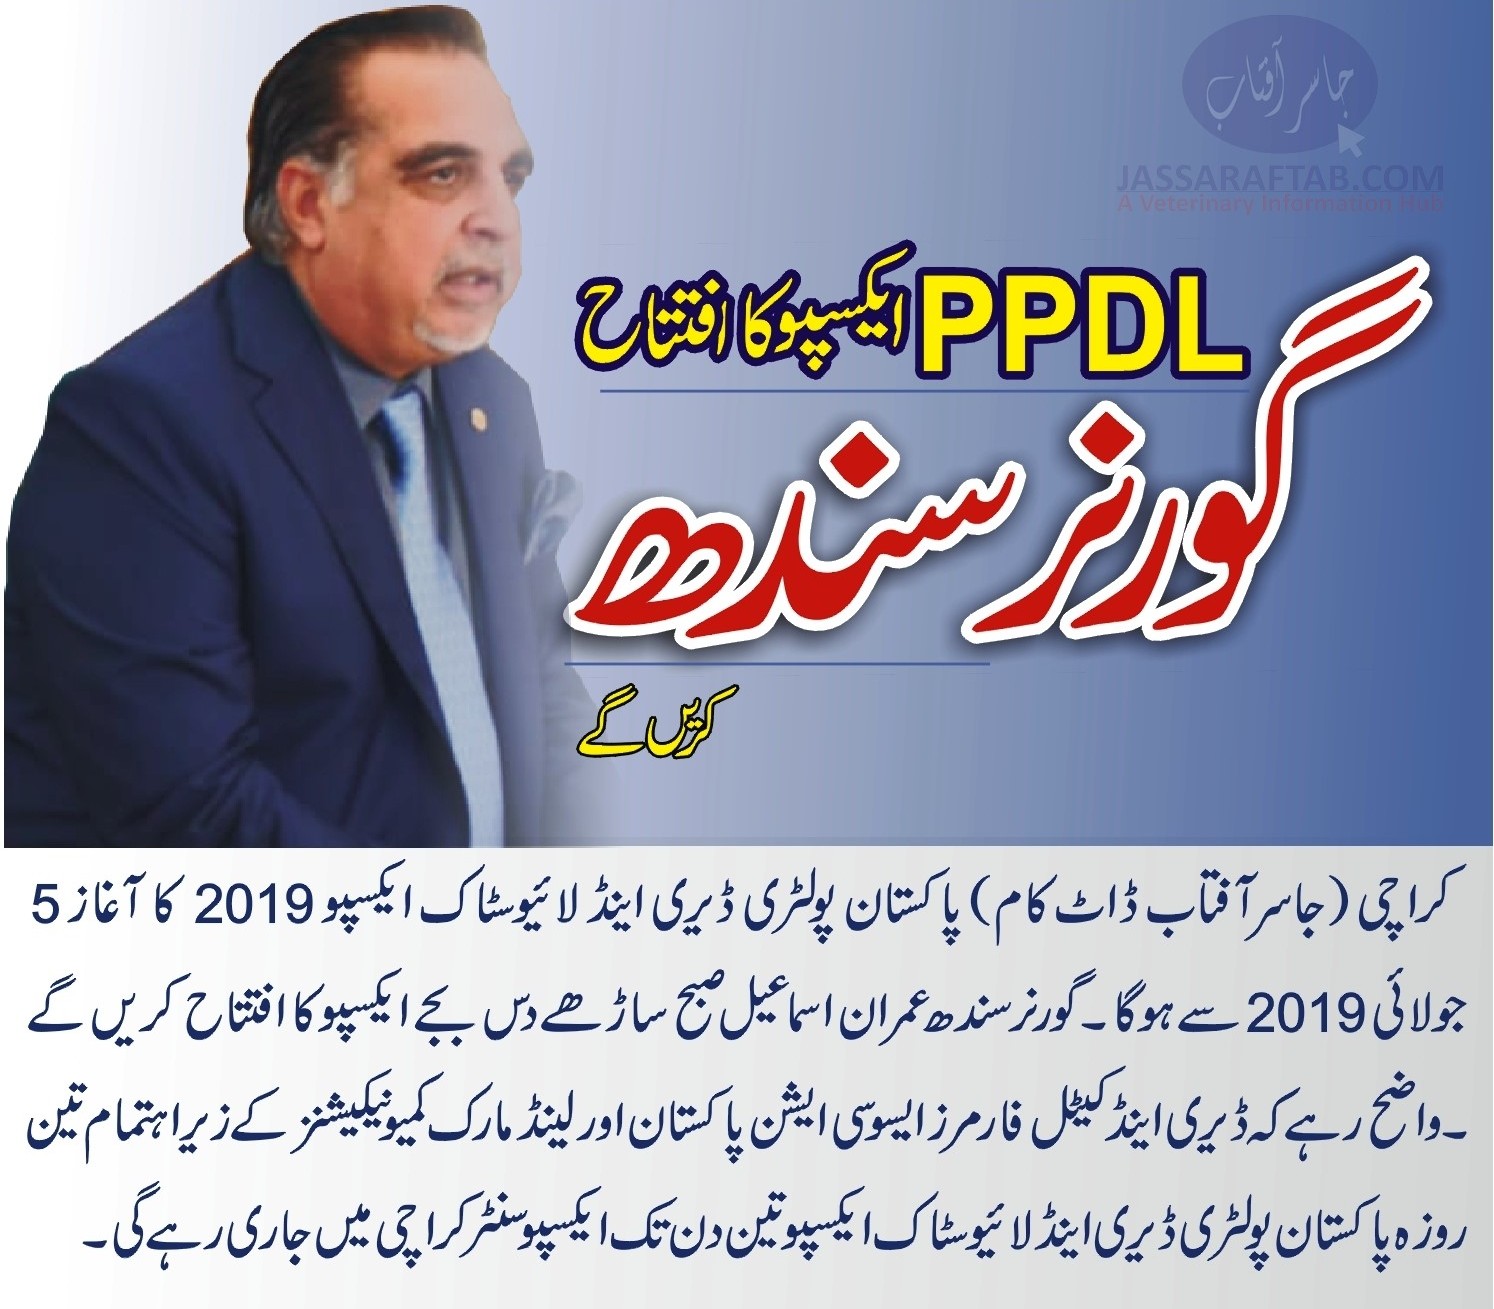 Governor Imran Ismail at PPDL Expo